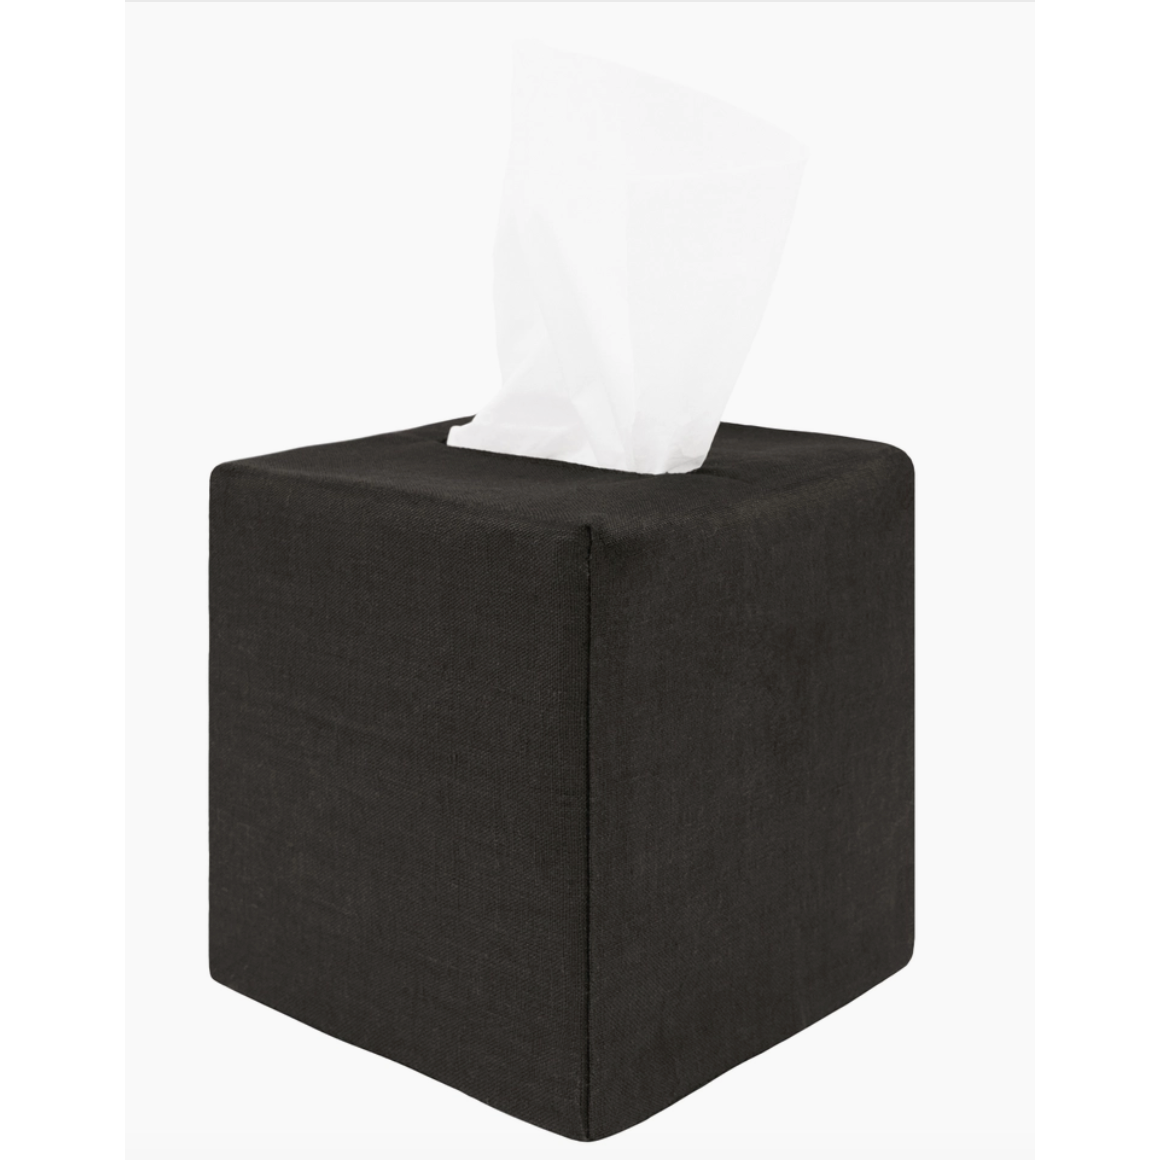 Tissue Box Covers- ALL COLORS